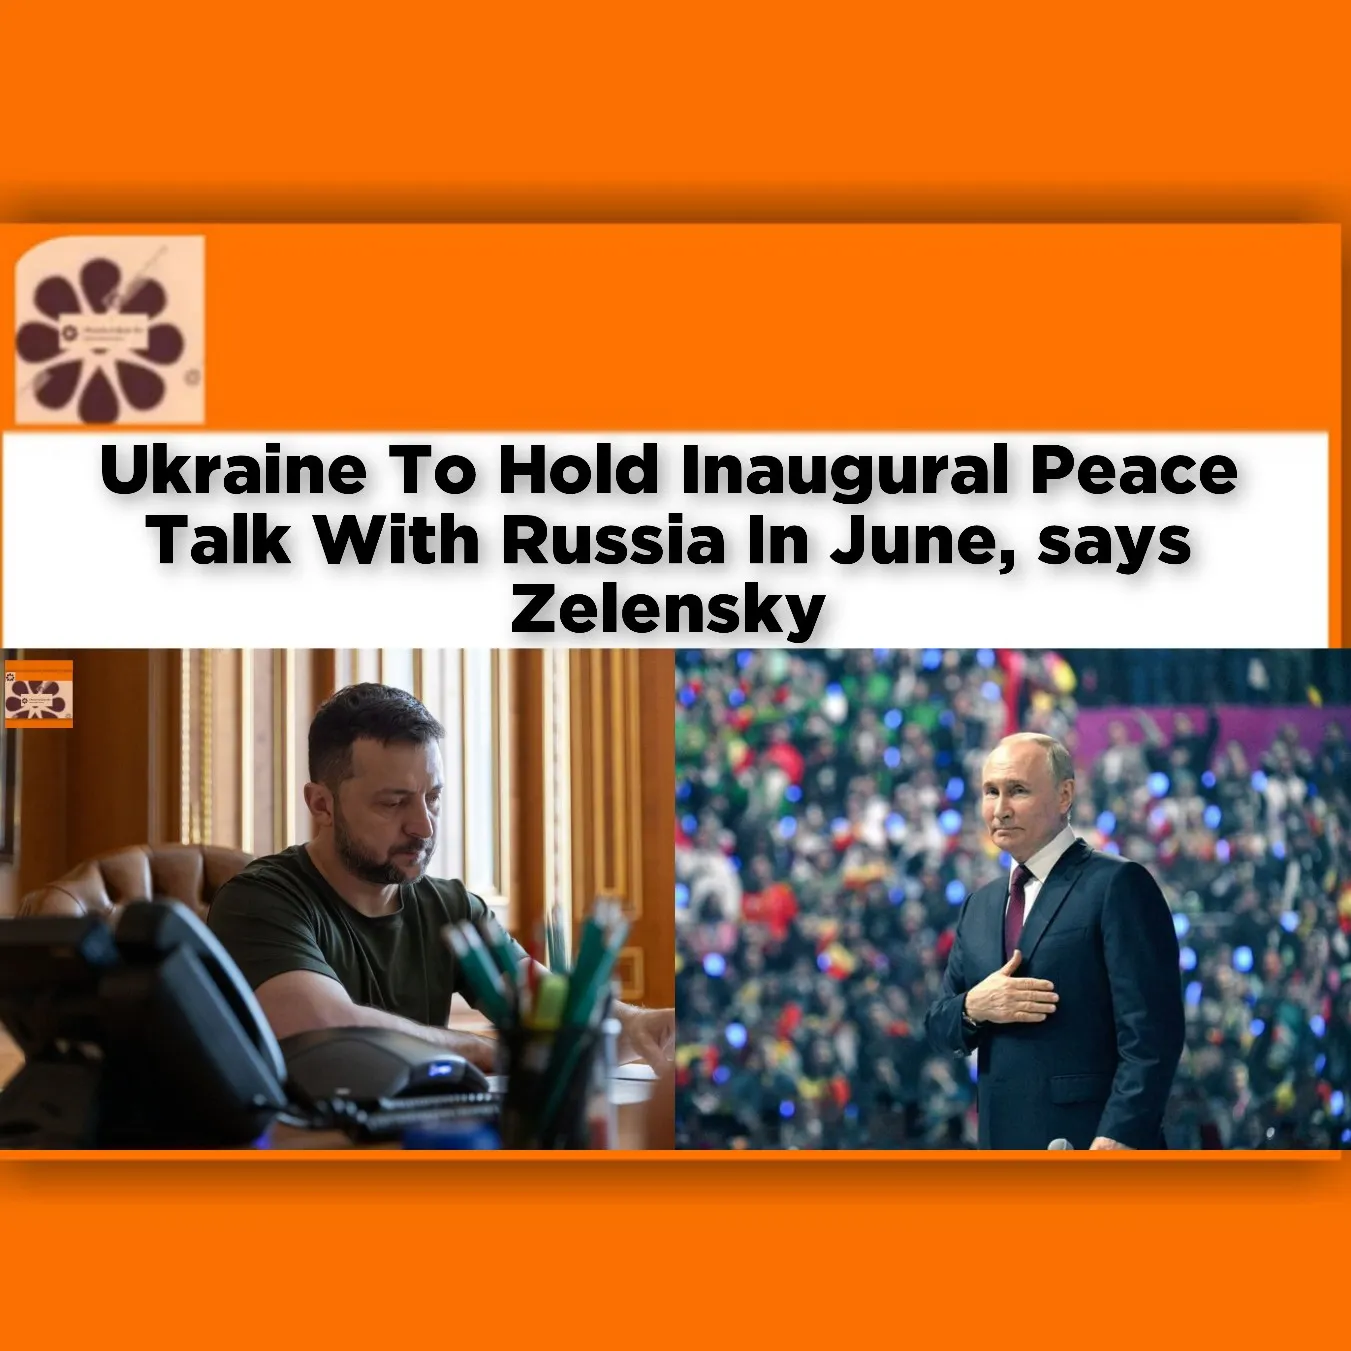 Ukraine To Hold Inaugural Peace Talk With Russia In June, says Zelensky ~ OsazuwaAkonedo #Forces